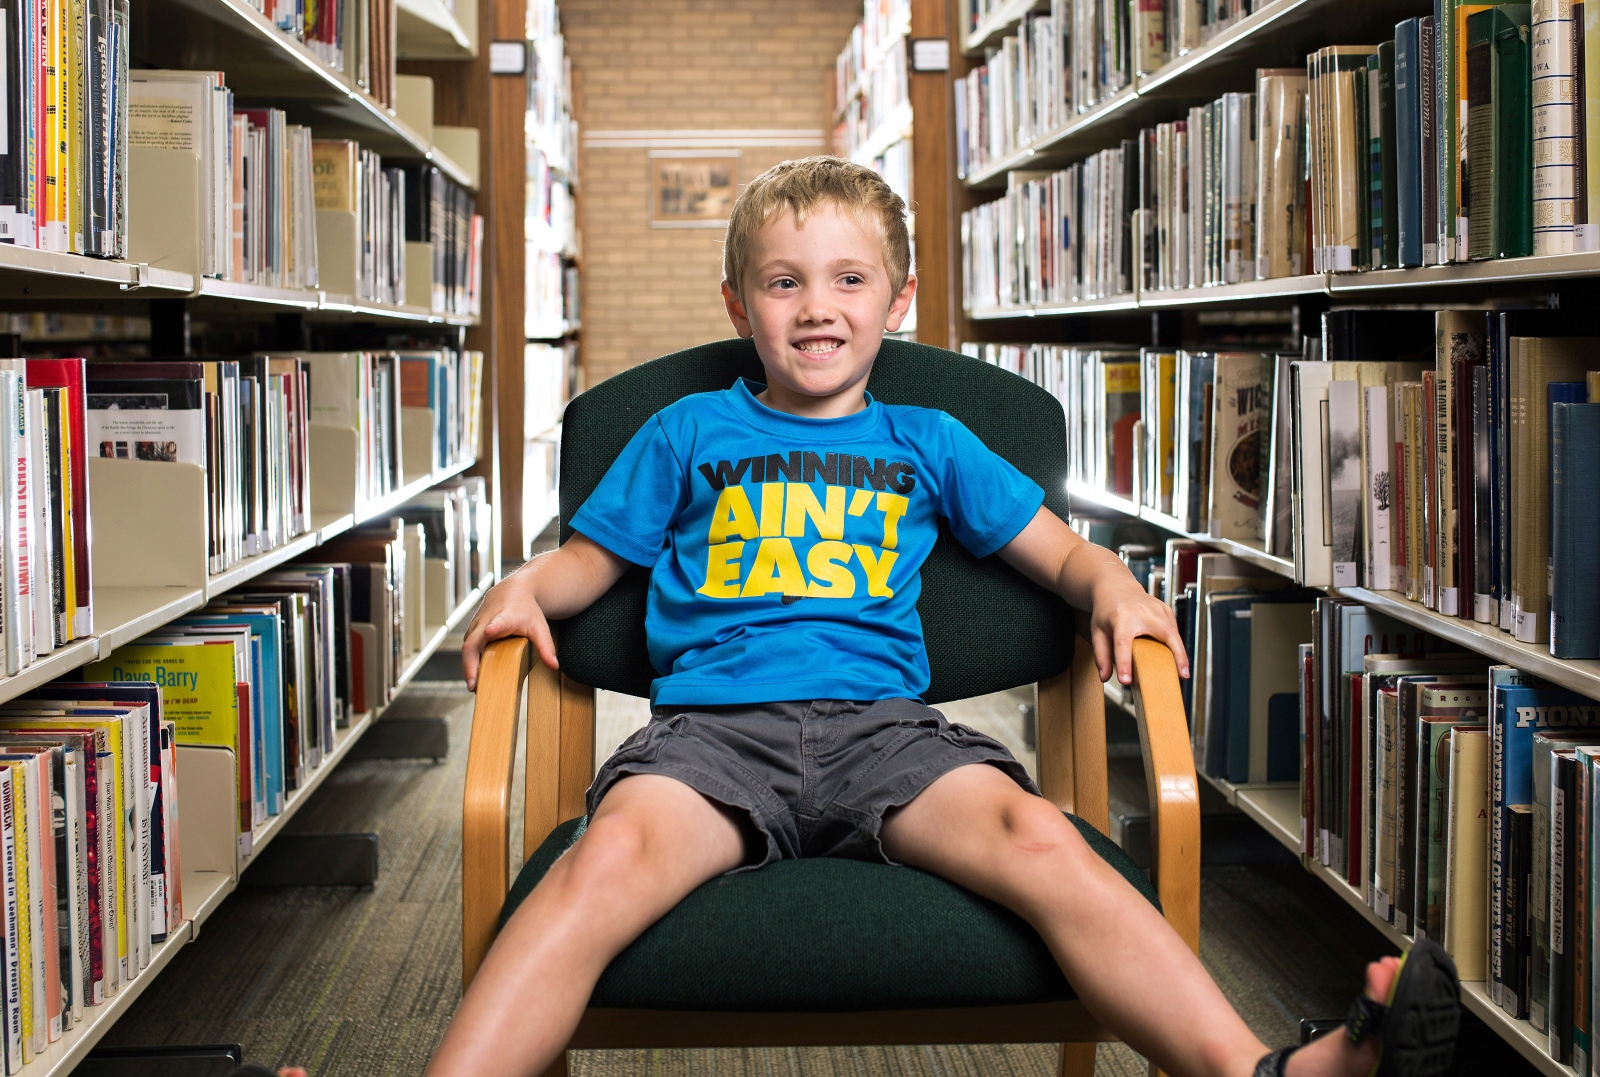  Harrison Auge, 5: â€œI like to grab the books and check them out. I like books about owls and...